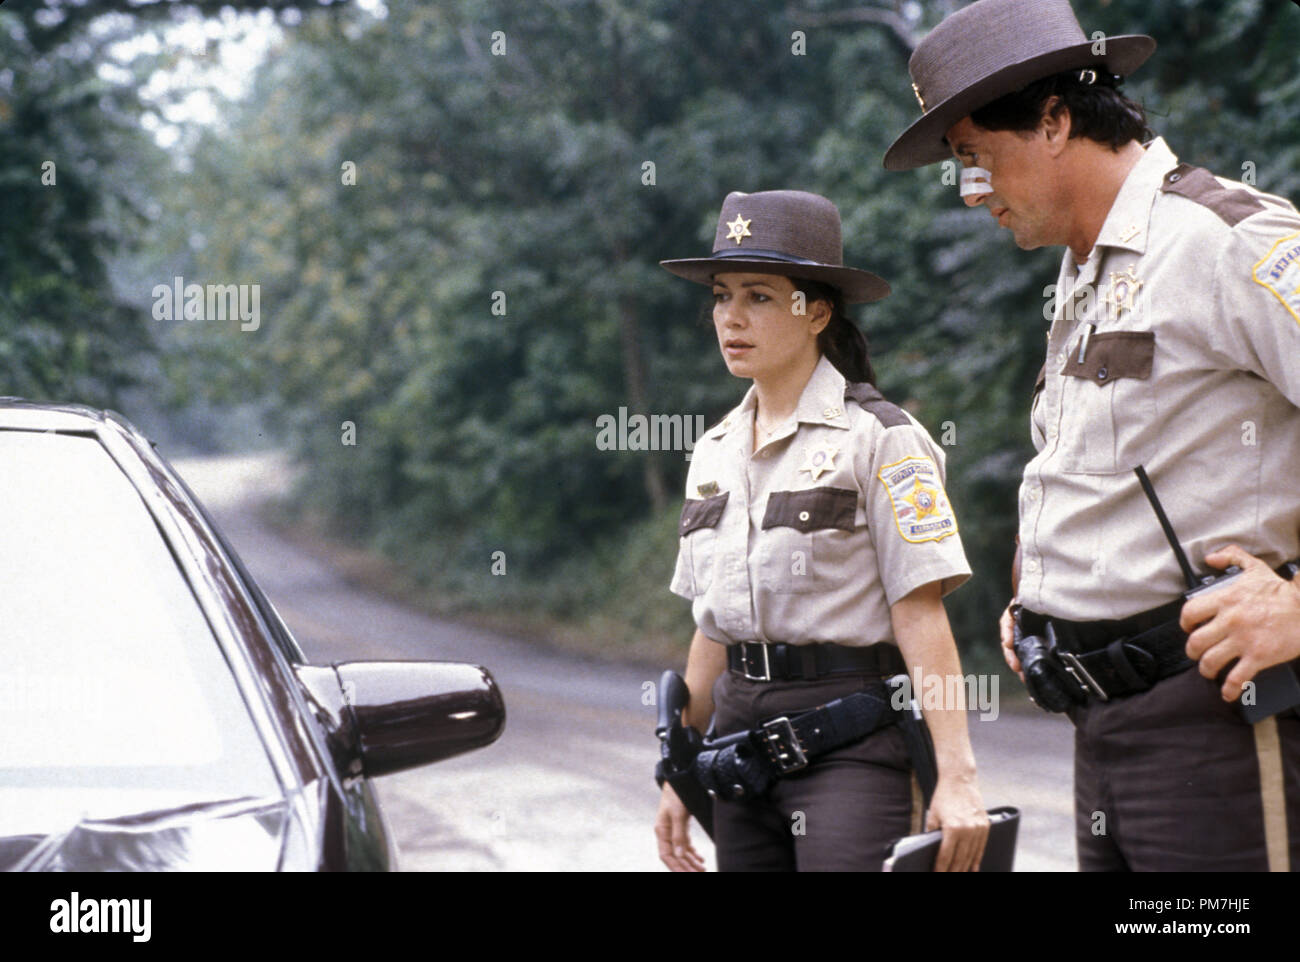 Film Still from 'Cop Land' Janeane Garofalo, Sylvester Stallone © 1997 Miramax Films Photo Credit: Sam Emerson   File Reference # 31013382THA  For Editorial Use Only - All Rights Reserved Stock Photo